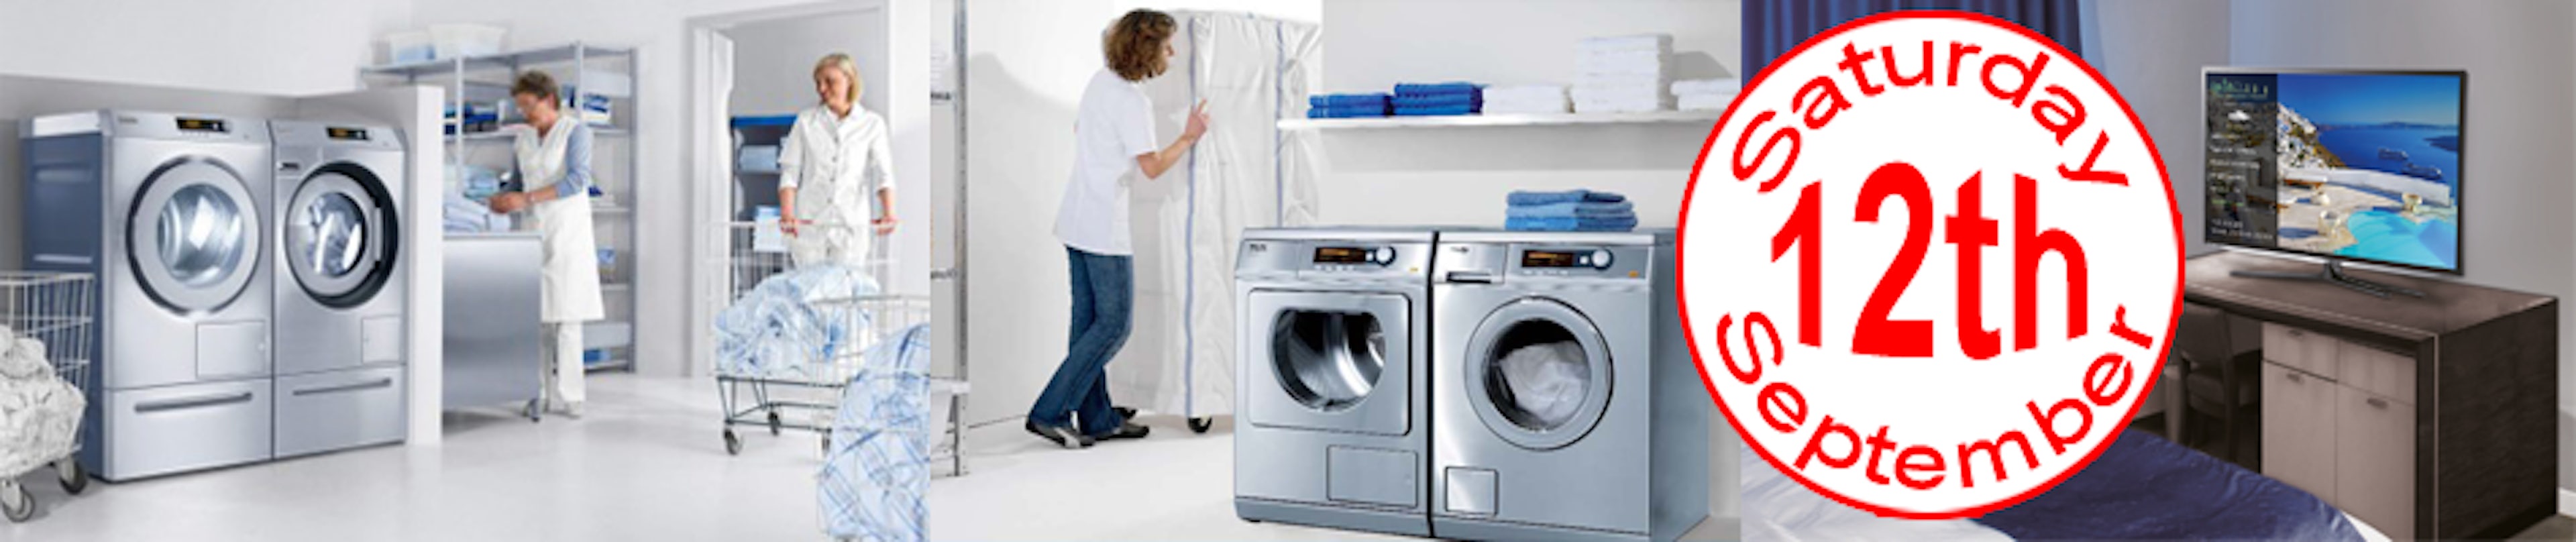 Washing and drying machines in hospitality venues and hotels